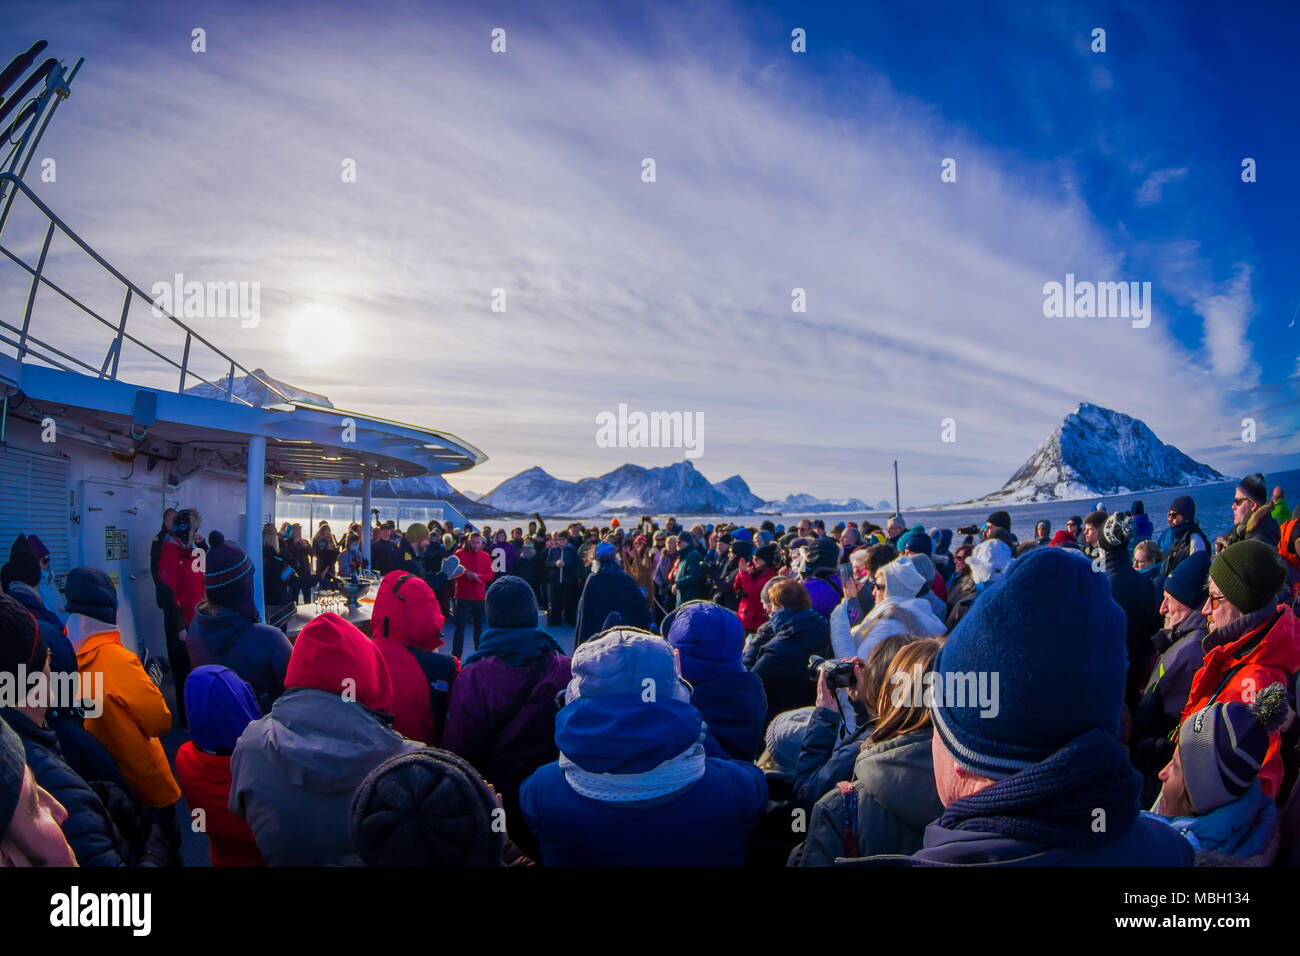 ALESUND, NORWAY - APRIL 04, 2018: Outdoor view of crowd of people in a KONG HARALD cruise enjoying and spending good time with other passengers, in Norway's coast between Bergen and Kirkenes Stock Photo